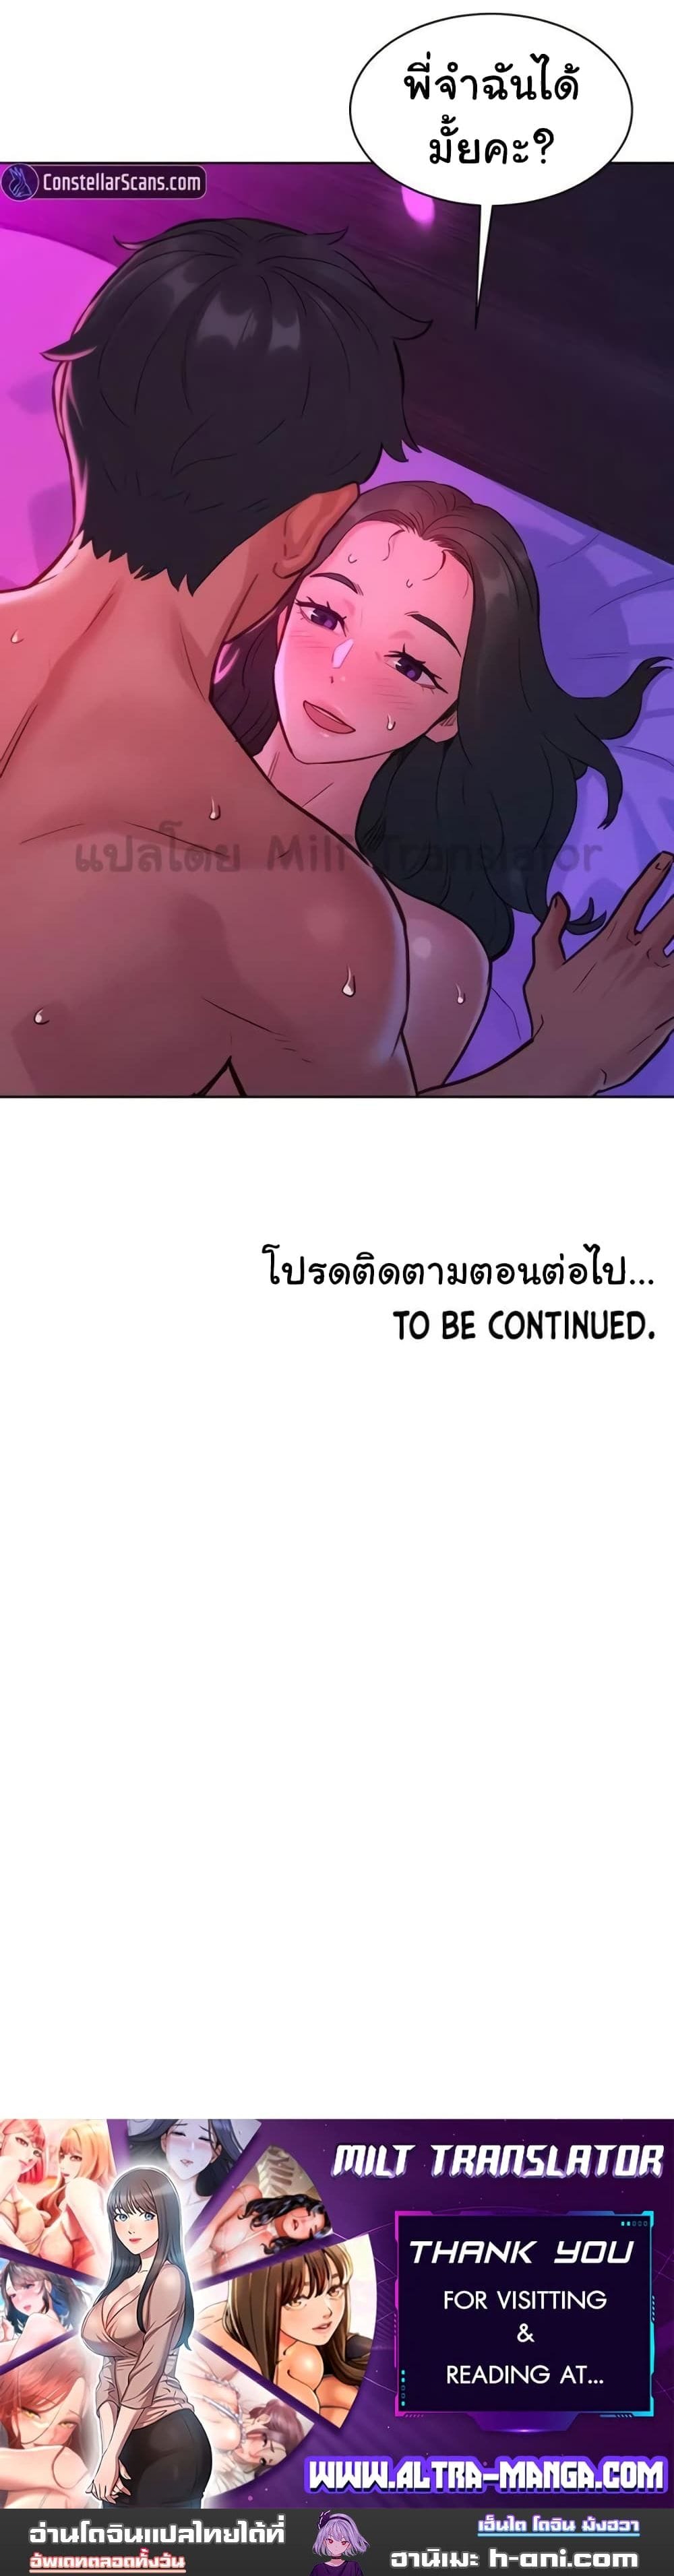 Let’s Hang Out from Today ตอนที่ 15 ภาพ 14